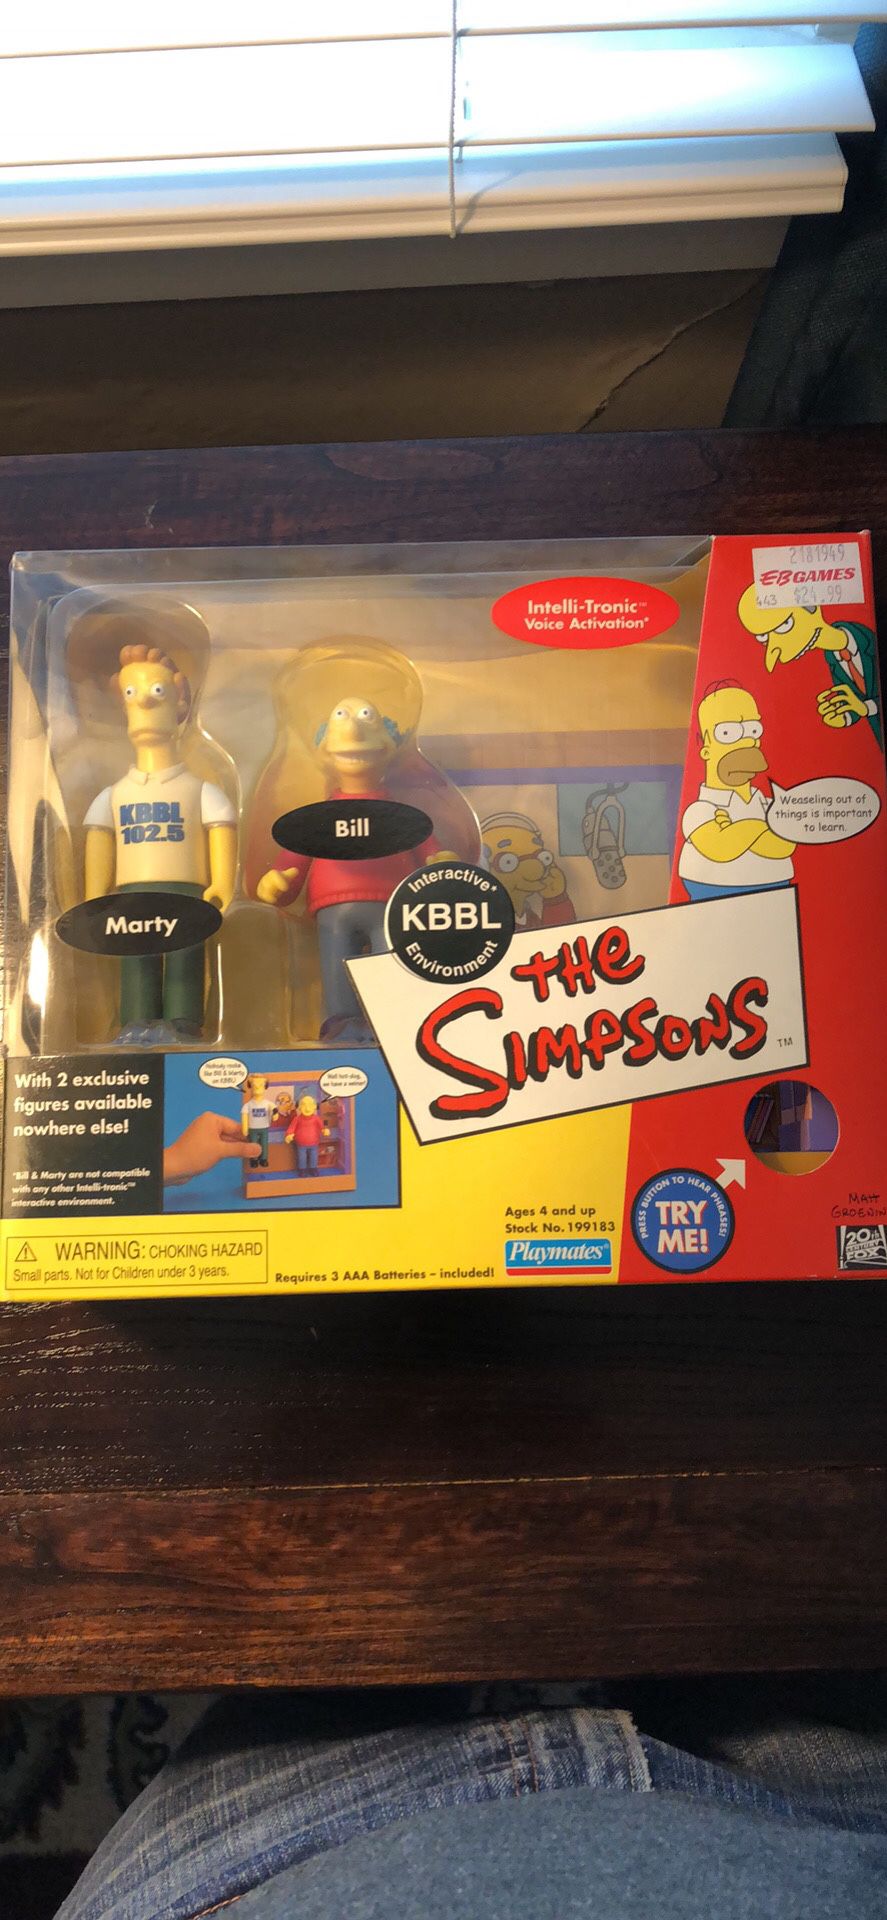 Simpsons KBBL Enviroment Diorama Marty Bill Interactive Figures 2002 Toy NEW